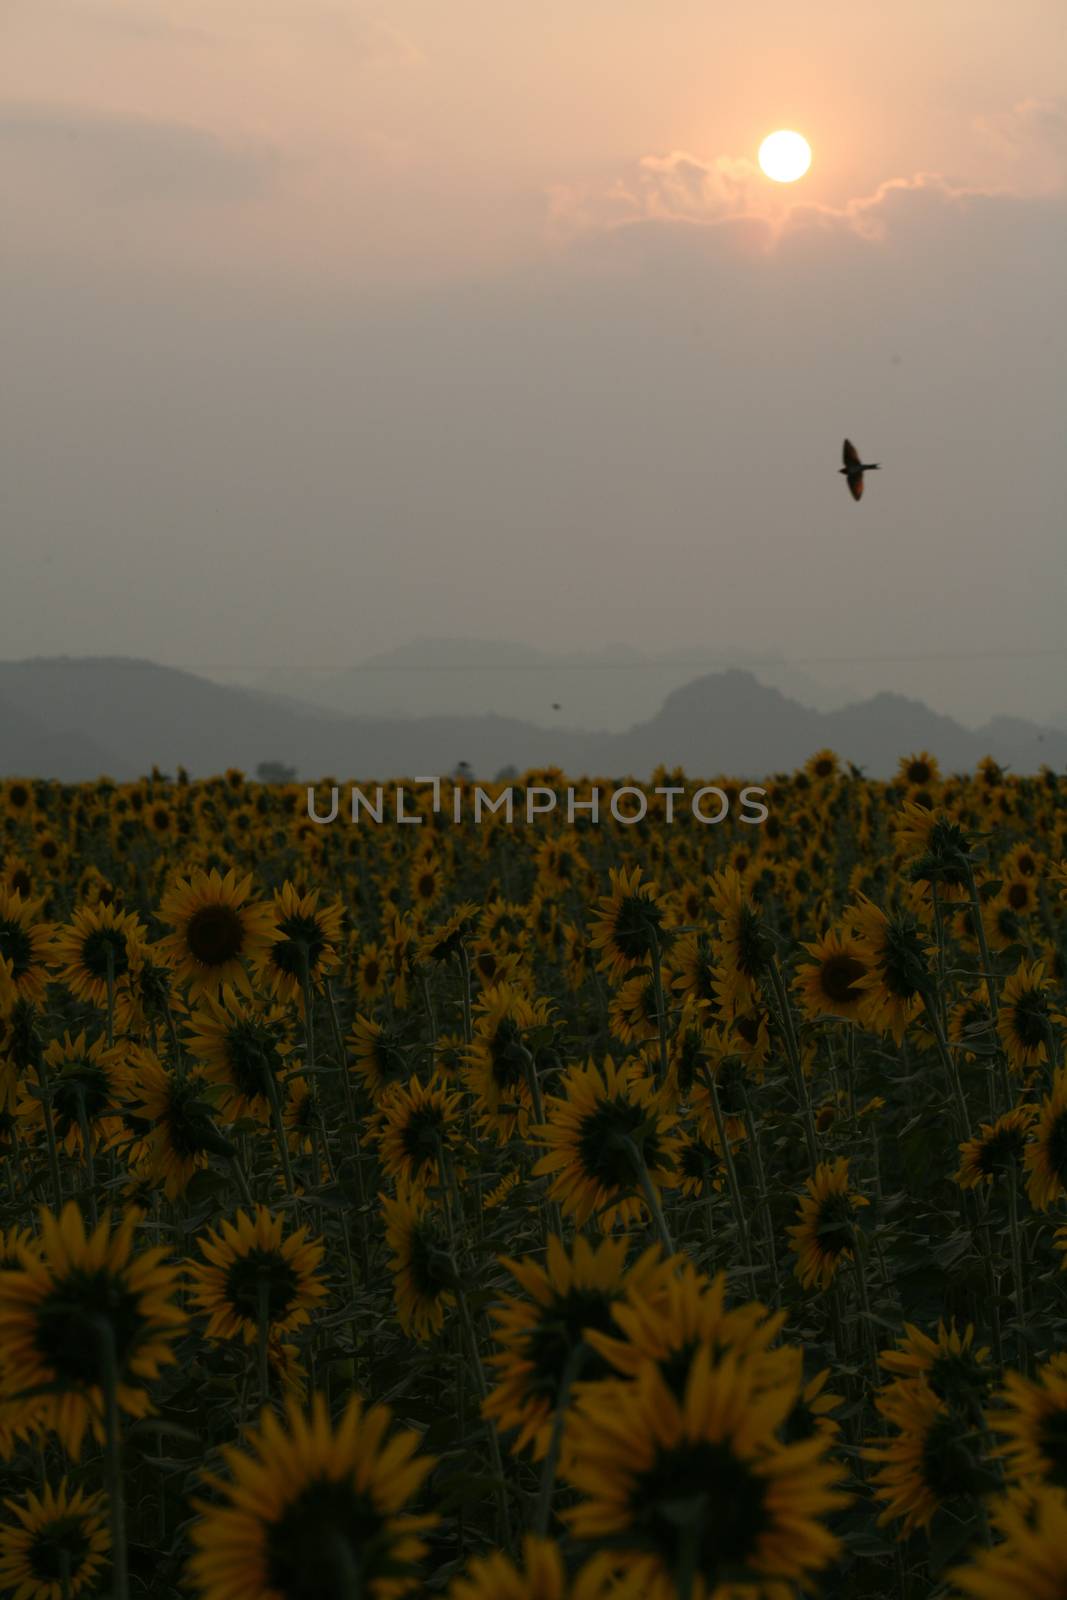 A field of sunflowers at sunset, Thailand by think4photop